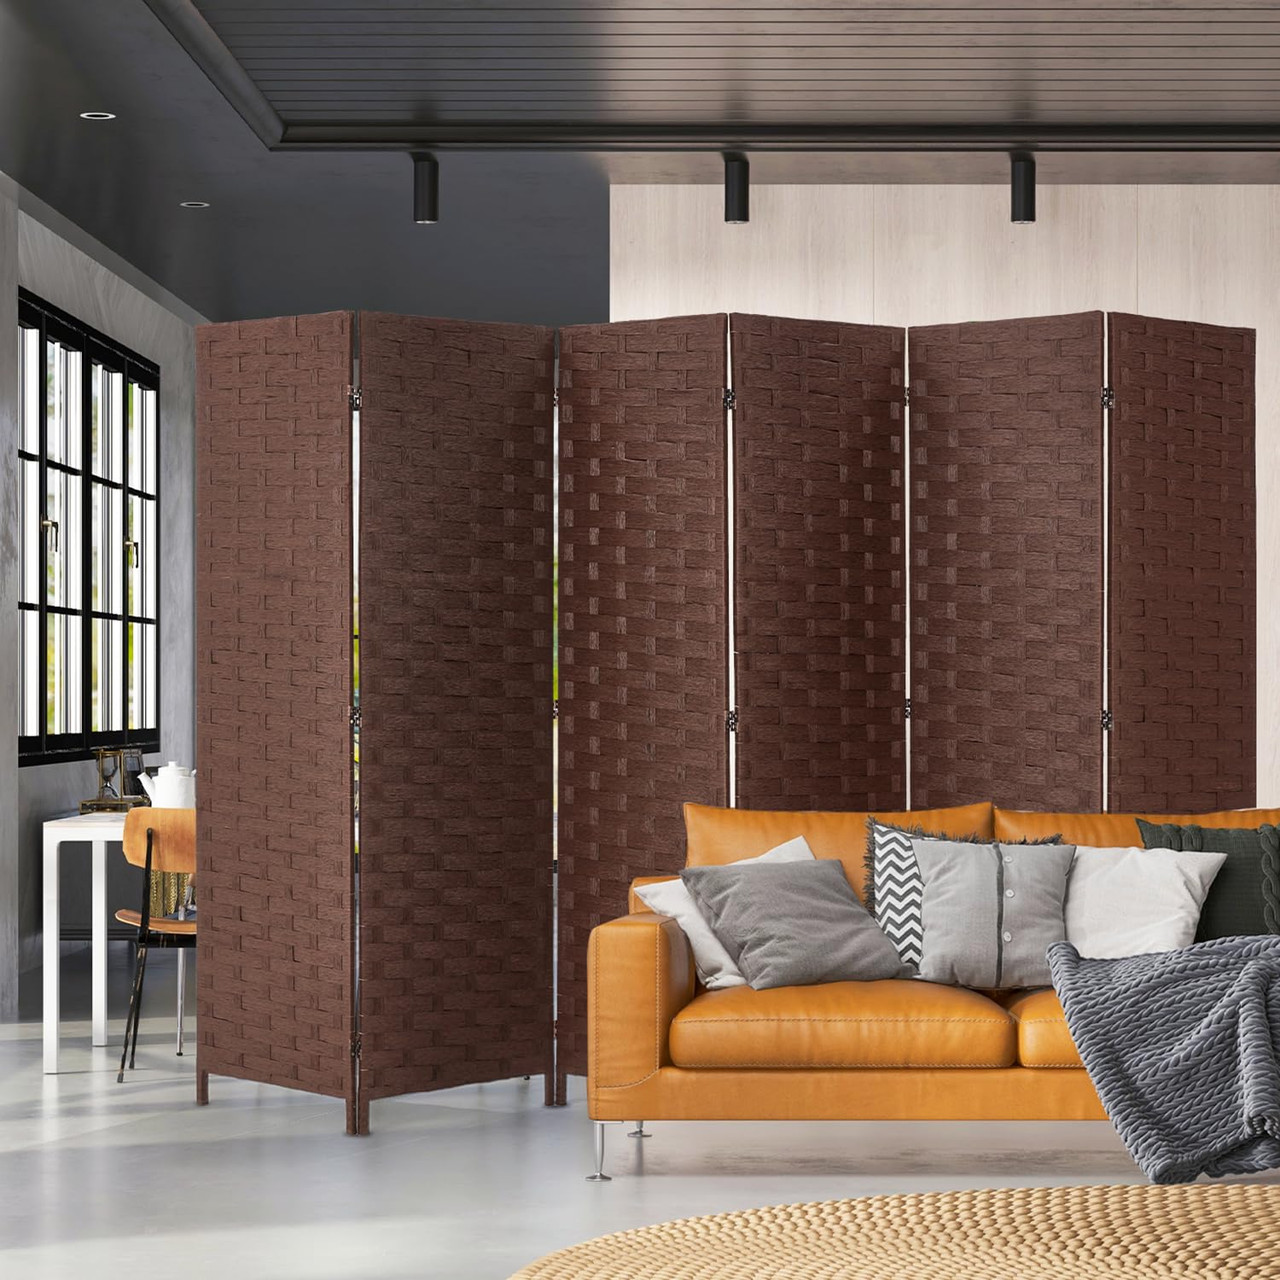 6-Foot 6-Panel Room Divider Privacy Screen product image